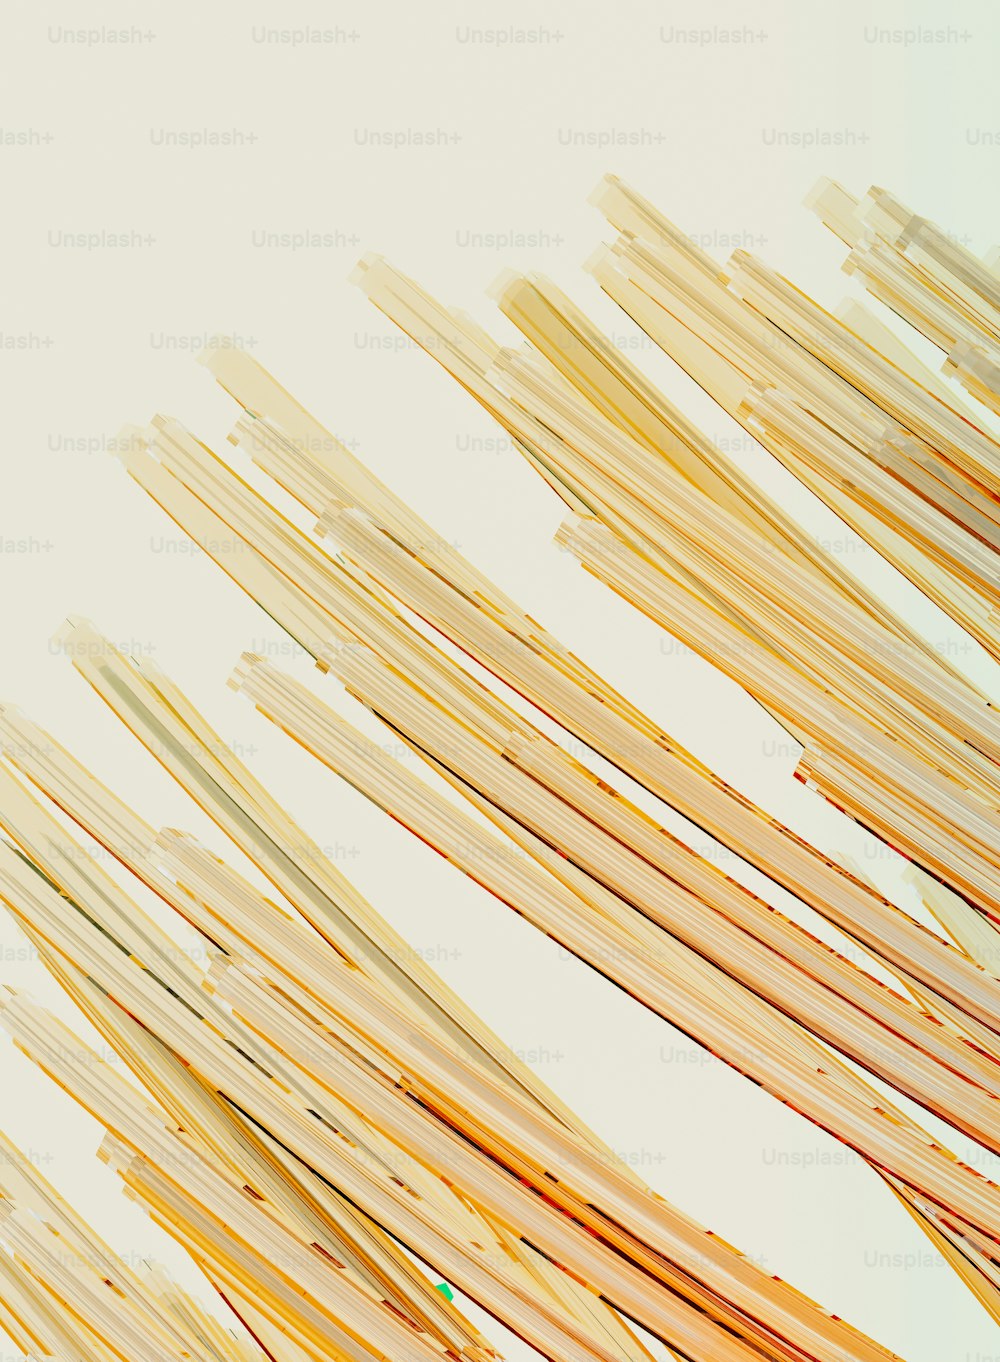 a close up of a bunch of toothpicks on a white surface